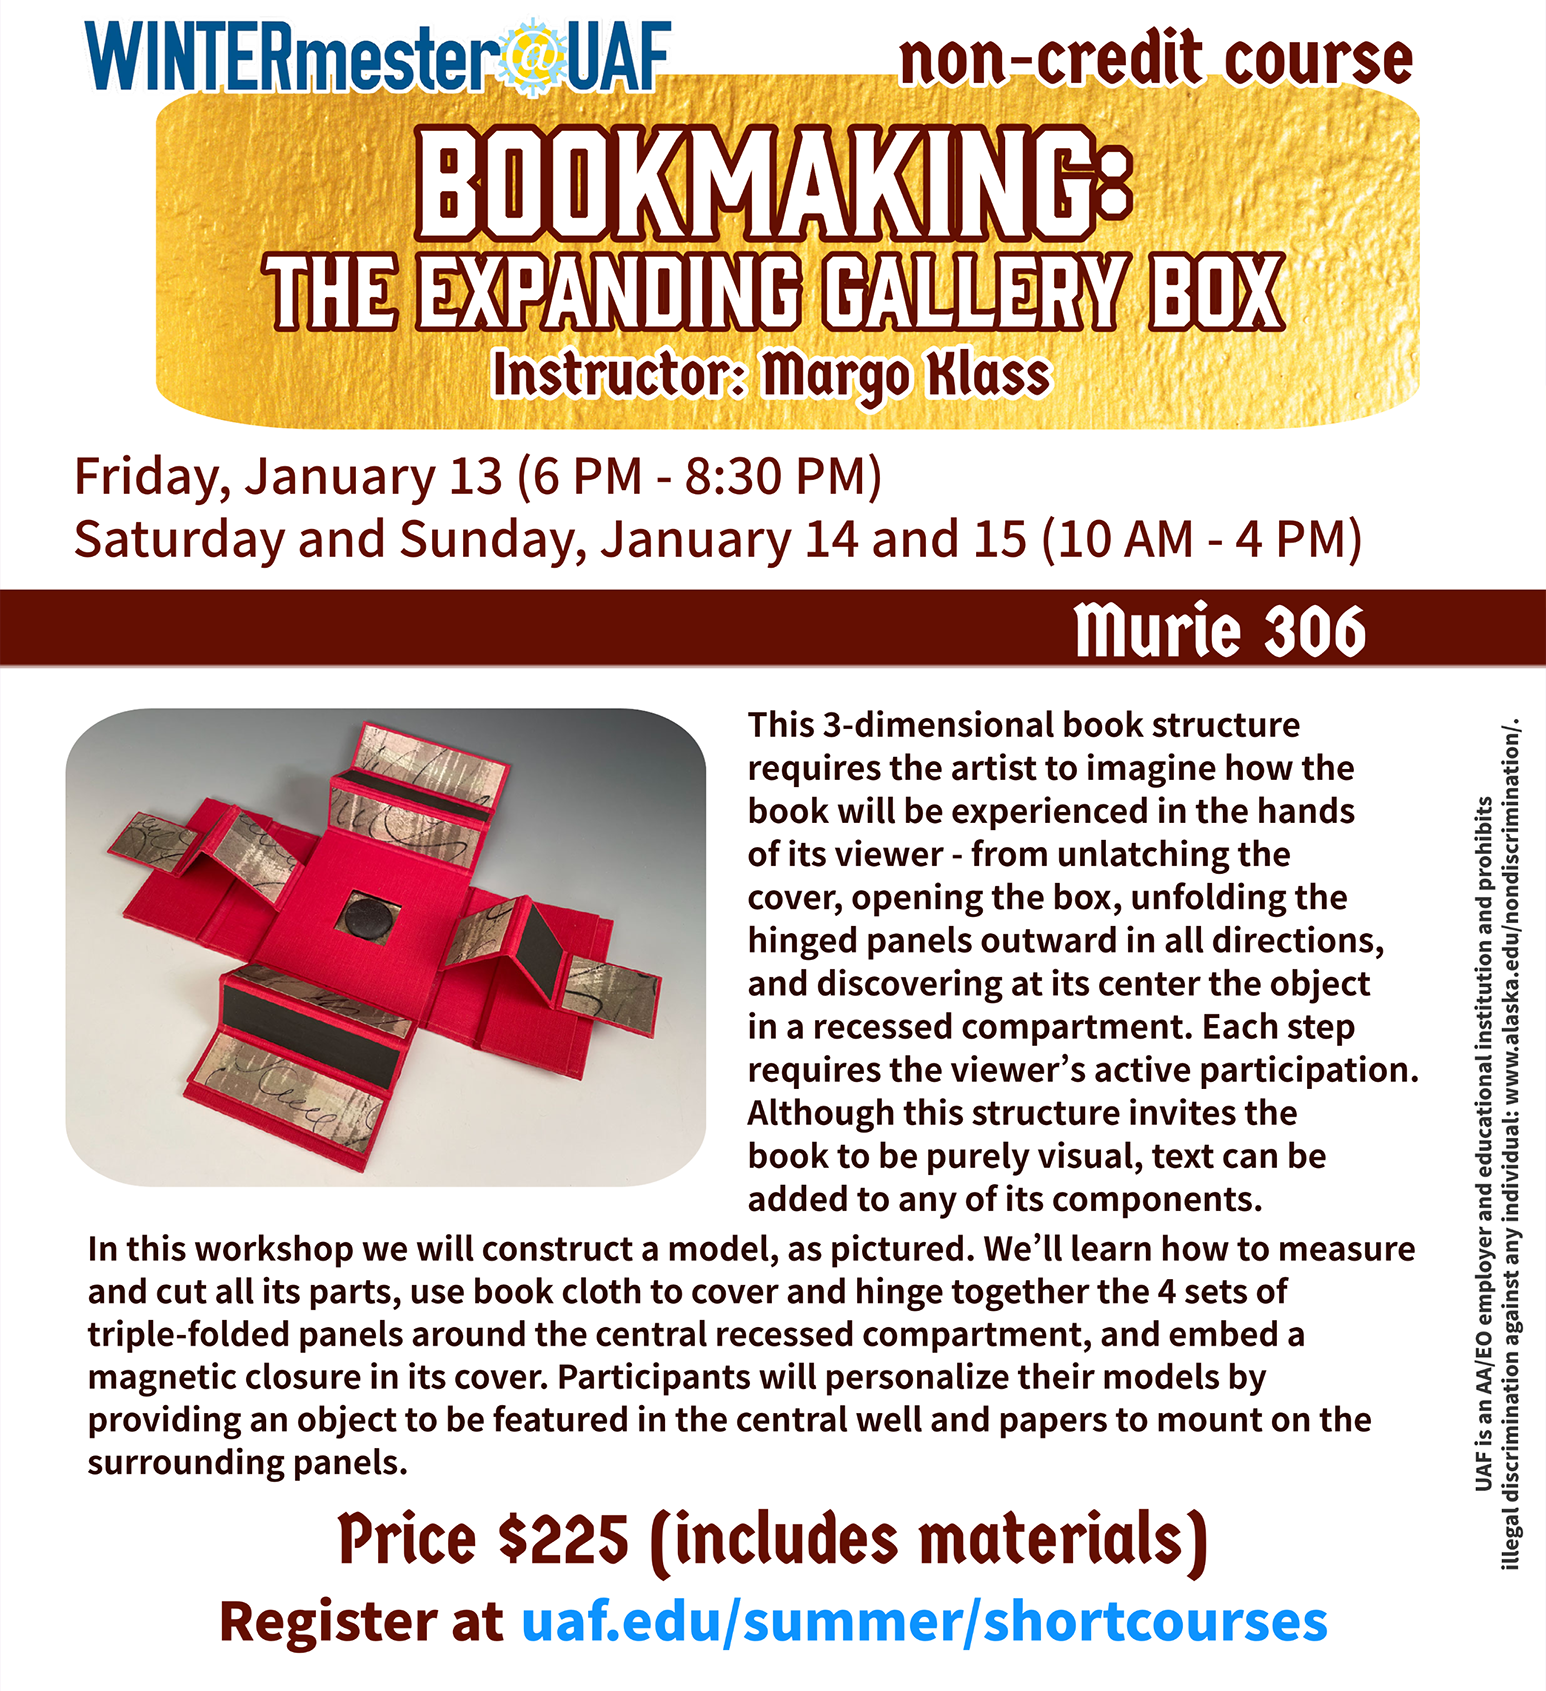 Bookmaking: The expanding gallery box 2023 Winter course poster